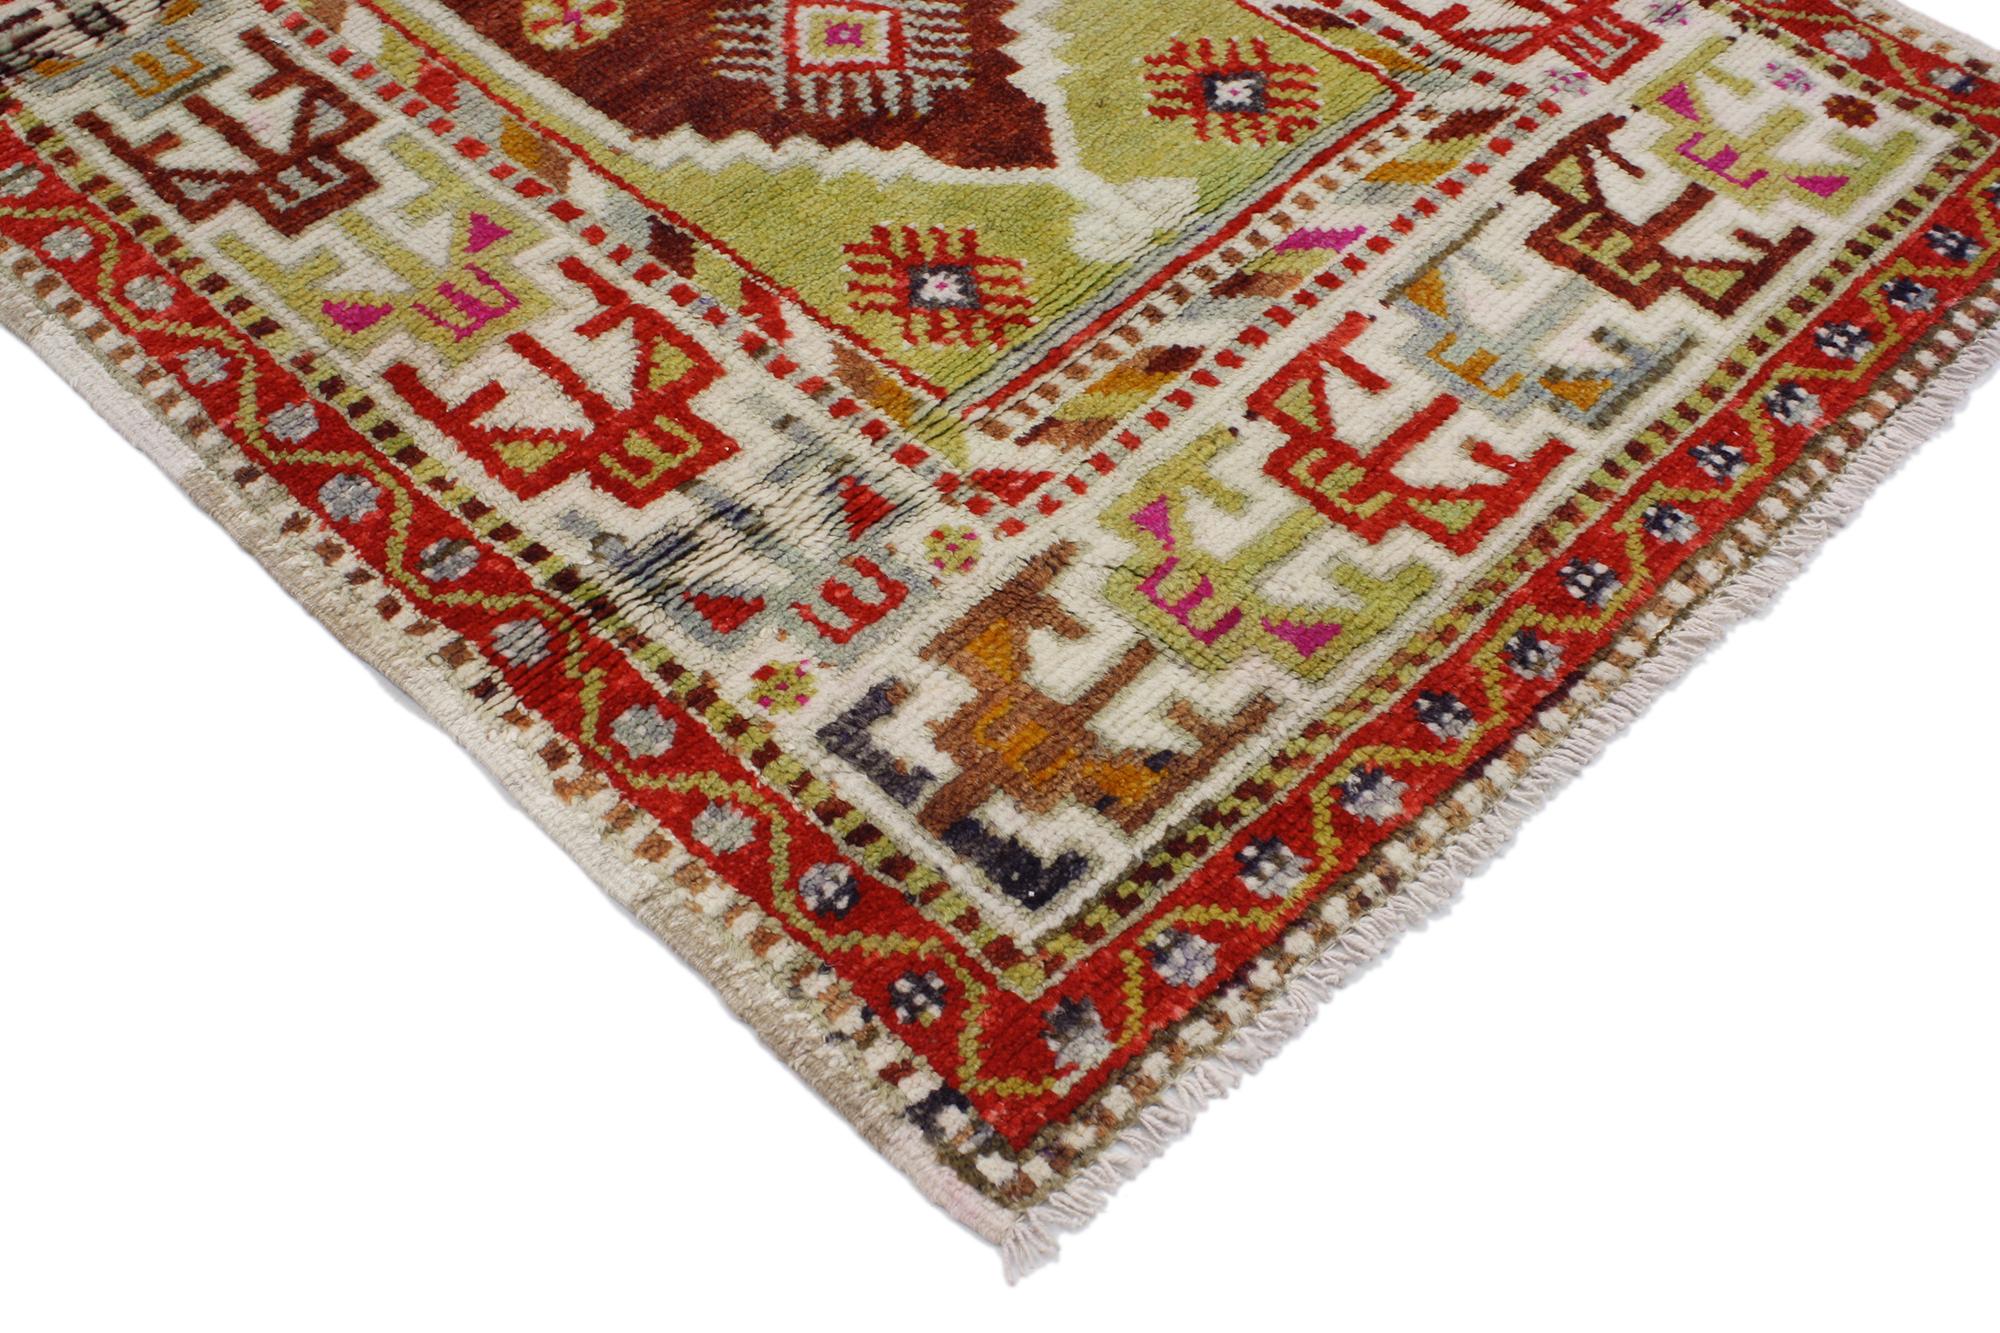 51752, Vintage Turkish Oushak Rug with Bohemian Tribal Style 02'08 x 05'03.?? This vintage Turkish Oushak rug features a modern Art Deco style. Immersed in Anatolian history and refined colors, this vintage Oushak rug combines simplicity with